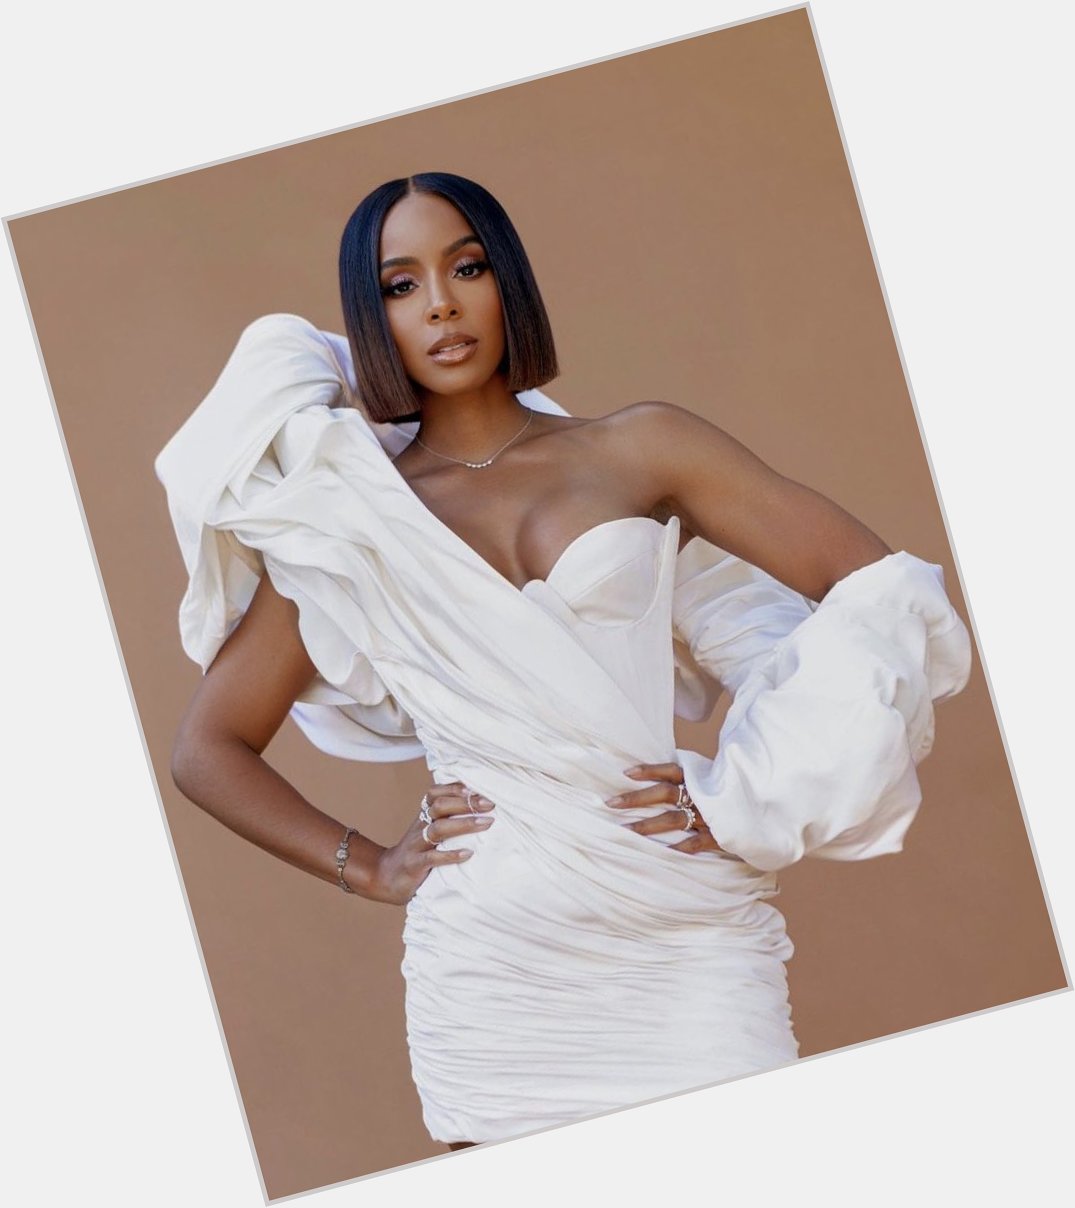 Happy birthday to the Absolutely Stunning R&B queen, Kelly Rowland  